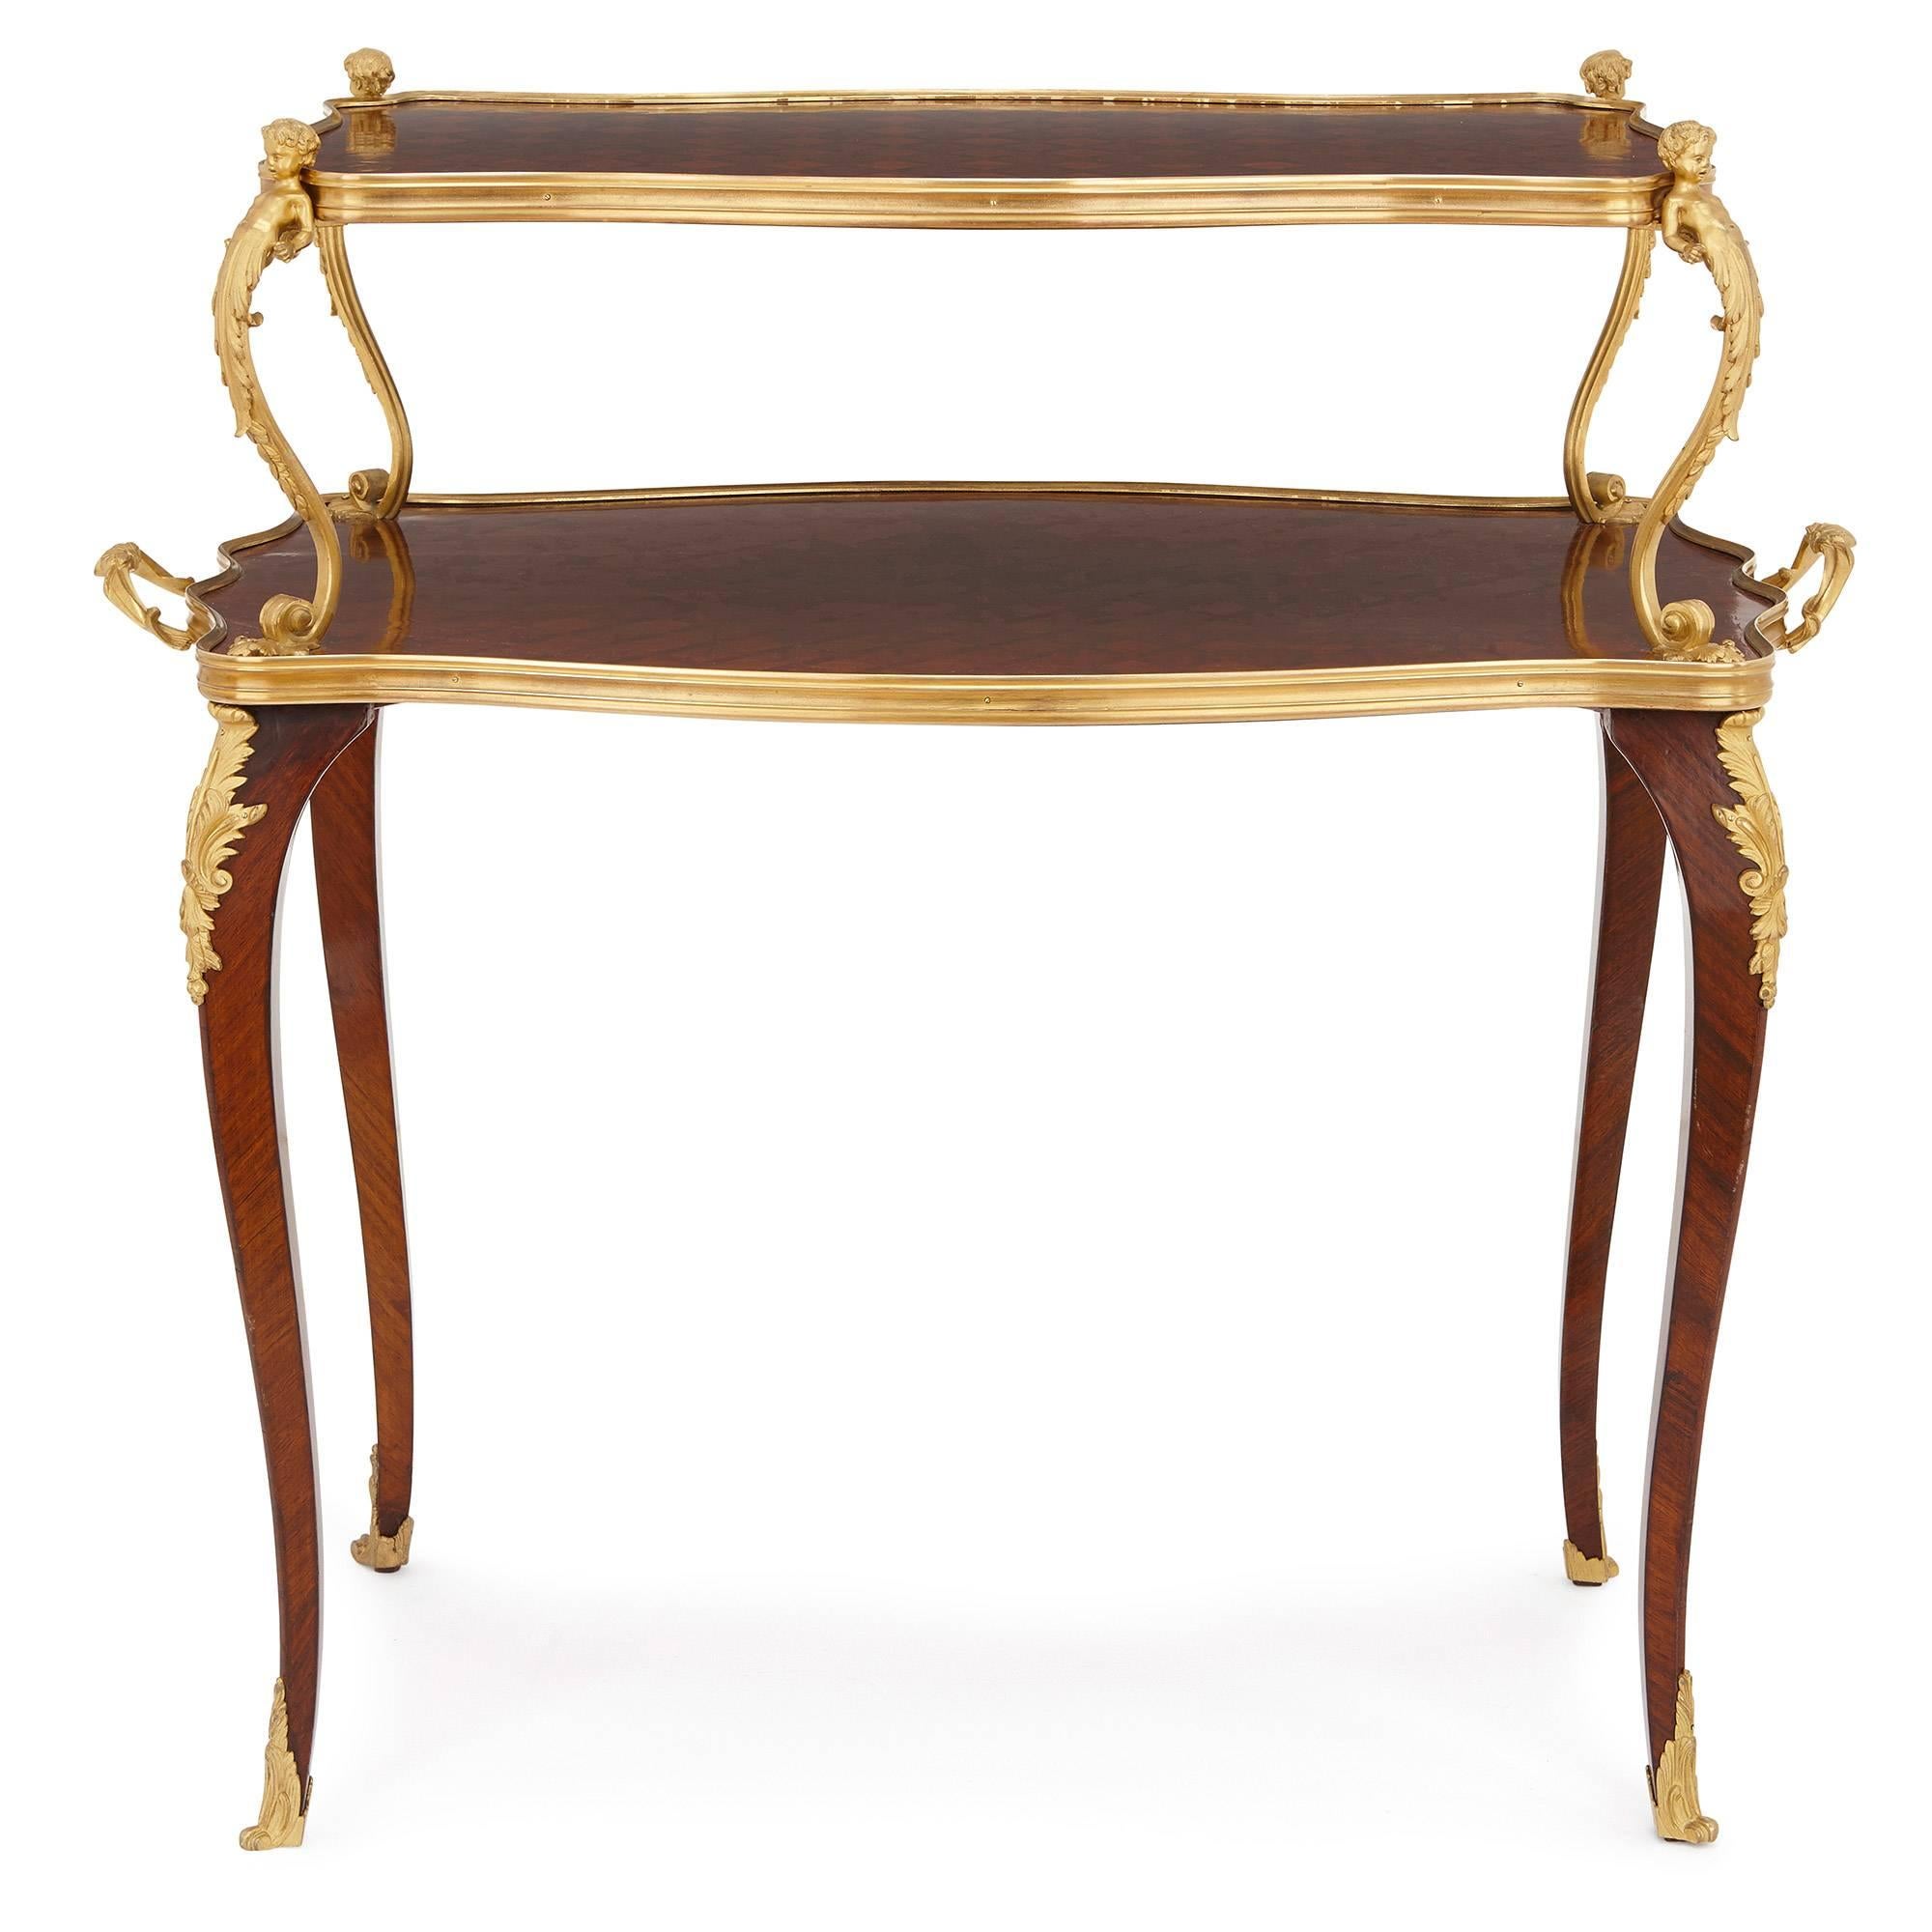 Featuring parquetry designs, exquisite curved gilt bronze mounts and a two-tier design, this beautiful tea table is the result of highly skilled craftsmanship. The upper tier of the table is topped with a diamond parquetry design, and is supported